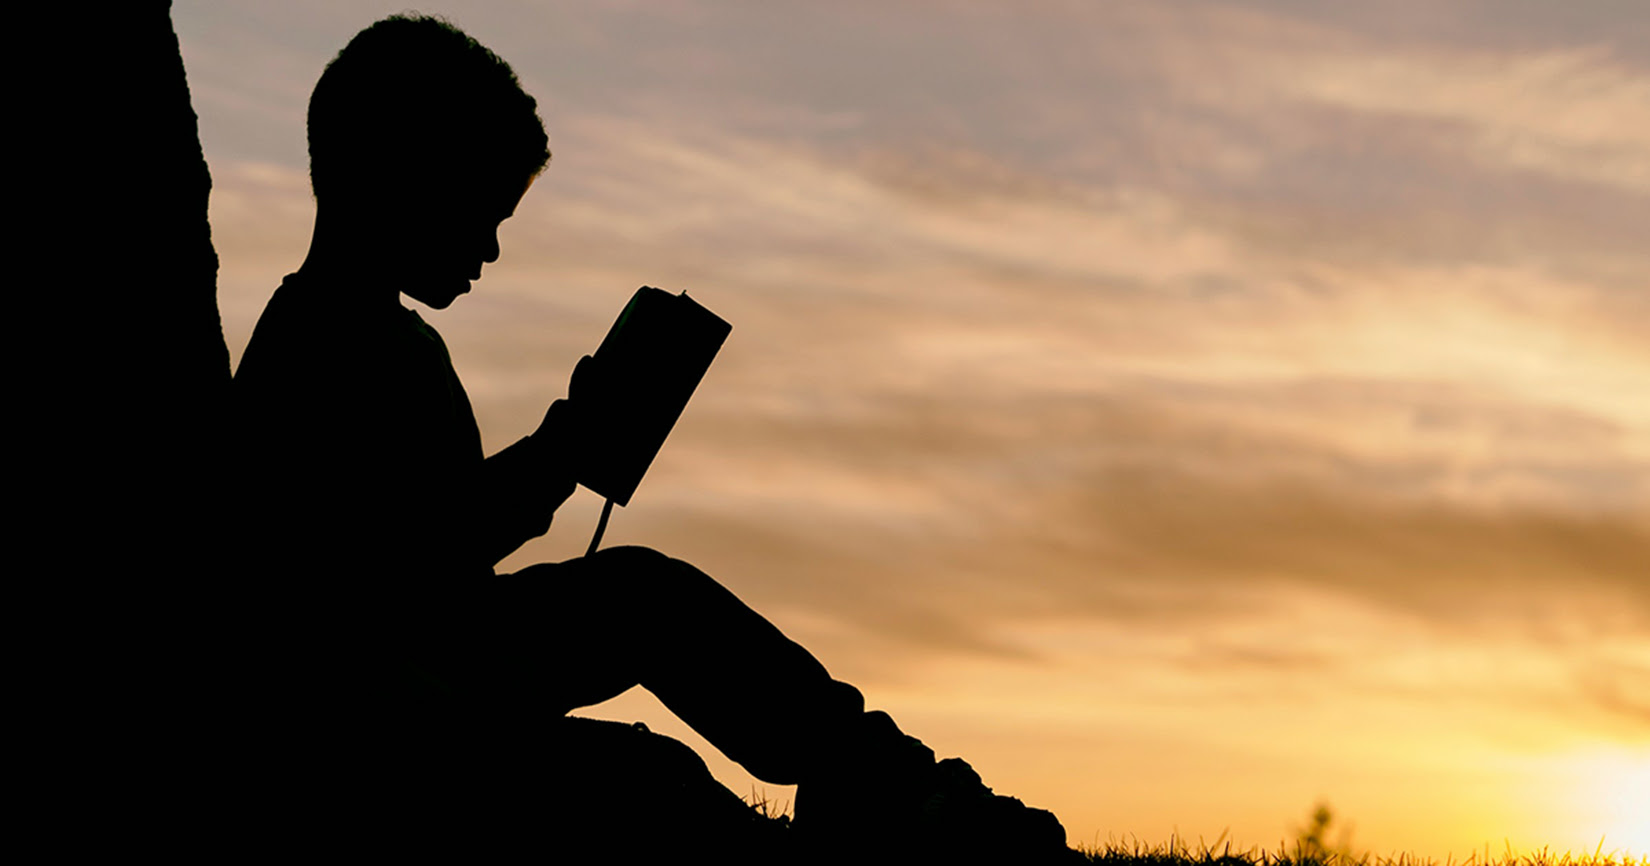 A silhouette of a child reading a book under a tree.